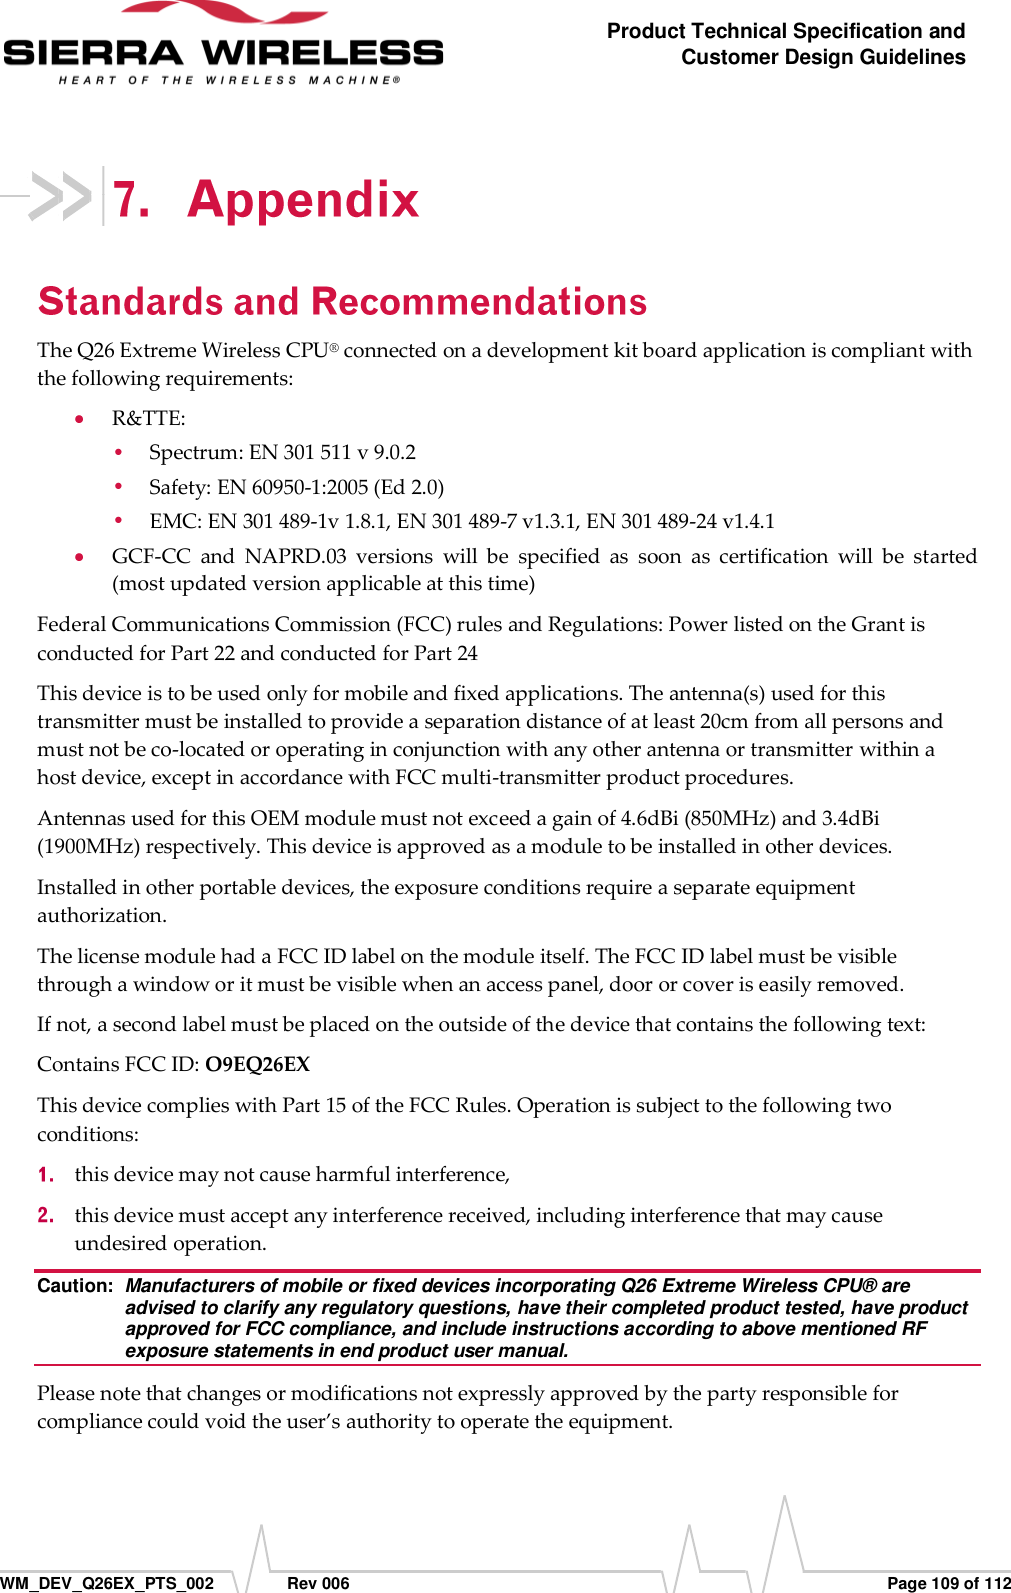      WM_DEV_Q26EX_PTS_002  Rev 006  Page 109 of 112 Product Technical Specification and Customer Design Guidelines  The Q26 Extreme Wireless CPU® connected on a development kit board application is compliant with the following requirements:  R&amp;TTE:  Spectrum: EN 301 511 v 9.0.2  Safety: EN 60950-1:2005 (Ed 2.0)  EMC: EN 301 489-1v 1.8.1, EN 301 489-7 v1.3.1, EN 301 489-24 v1.4.1  GCF-CC  and  NAPRD.03  versions  will  be  specified  as  soon  as  certification  will  be  started (most updated version applicable at this time) Federal Communications Commission (FCC) rules and Regulations: Power listed on the Grant is conducted for Part 22 and conducted for Part 24 This device is to be used only for mobile and fixed applications. The antenna(s) used for this transmitter must be installed to provide a separation distance of at least 20cm from all persons and must not be co-located or operating in conjunction with any other antenna or transmitter within a host device, except in accordance with FCC multi-transmitter product procedures. Antennas used for this OEM module must not exceed a gain of 4.6dBi (850MHz) and 3.4dBi (1900MHz) respectively. This device is approved as a module to be installed in other devices. Installed in other portable devices, the exposure conditions require a separate equipment authorization. The license module had a FCC ID label on the module itself. The FCC ID label must be visible through a window or it must be visible when an access panel, door or cover is easily removed.   If not, a second label must be placed on the outside of the device that contains the following text:  Contains FCC ID: O9EQ26EX This device complies with Part 15 of the FCC Rules. Operation is subject to the following two conditions:   this device may not cause harmful interference,   this device must accept any interference received, including interference that may cause undesired operation. Caution:  Manufacturers of mobile or fixed devices incorporating Q26 Extreme Wireless CPU® are advised to clarify any regulatory questions, have their completed product tested, have product approved for FCC compliance, and include instructions according to above mentioned RF exposure statements in end product user manual. Please note that changes or modifications not expressly approved by the party responsible for compliance could void the user’s authority to operate the equipment. 